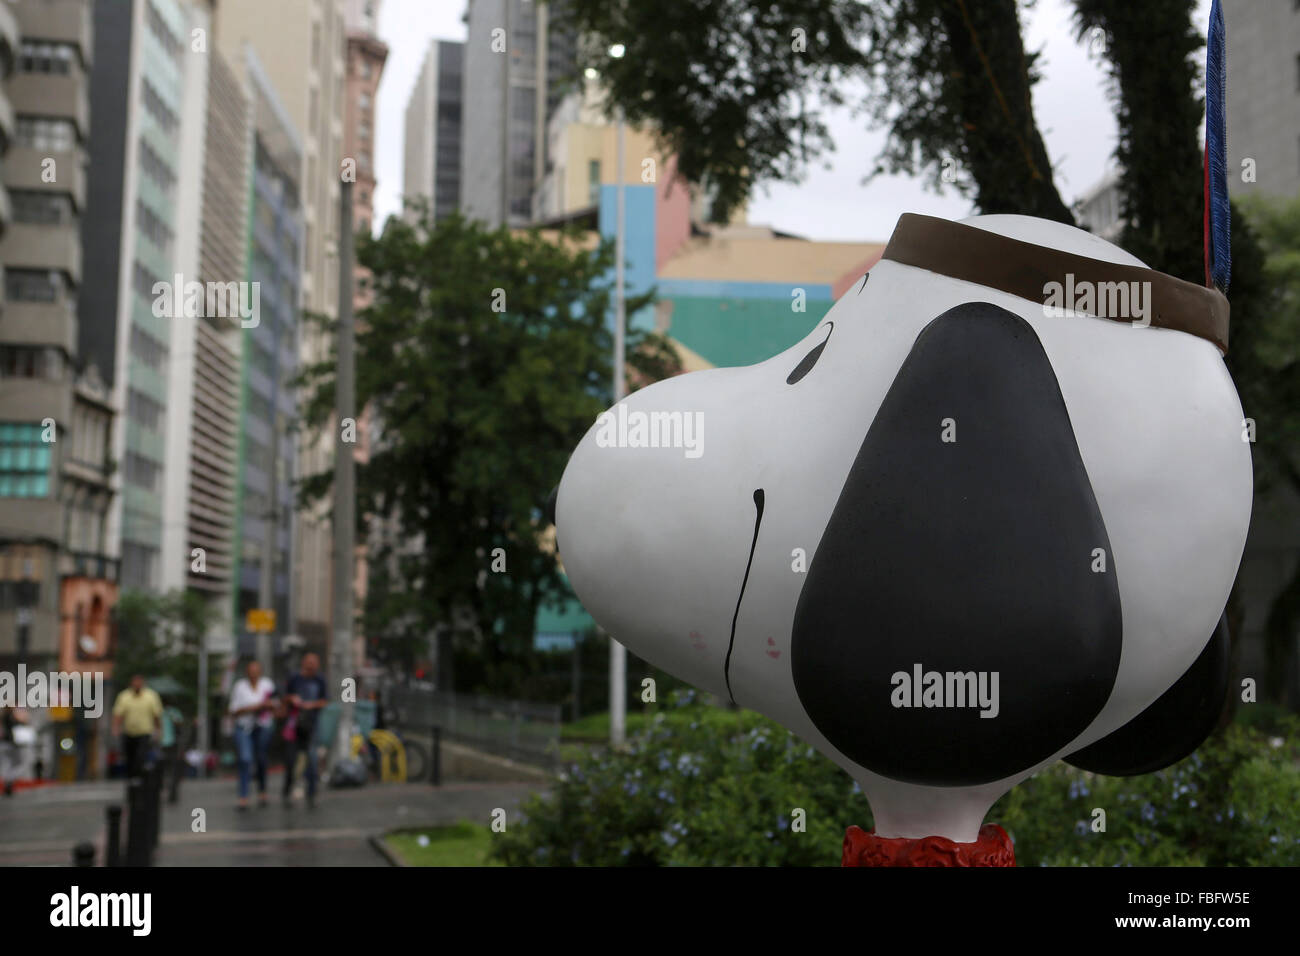 Sao Paulo, Brazil. 15th Jan, 2016. A figure of Snoopy is displayed on a street in Sao Paulo, Brazil, on Jan. 15, 2016. According to local press, figures of Snoopy are displayed in tourist places as part of the promotion of the film "Charlie Brown and Snoopy: Peanuts movie". © Rahel Patrasso/Xinhua/Alamy Live News Stock Photo